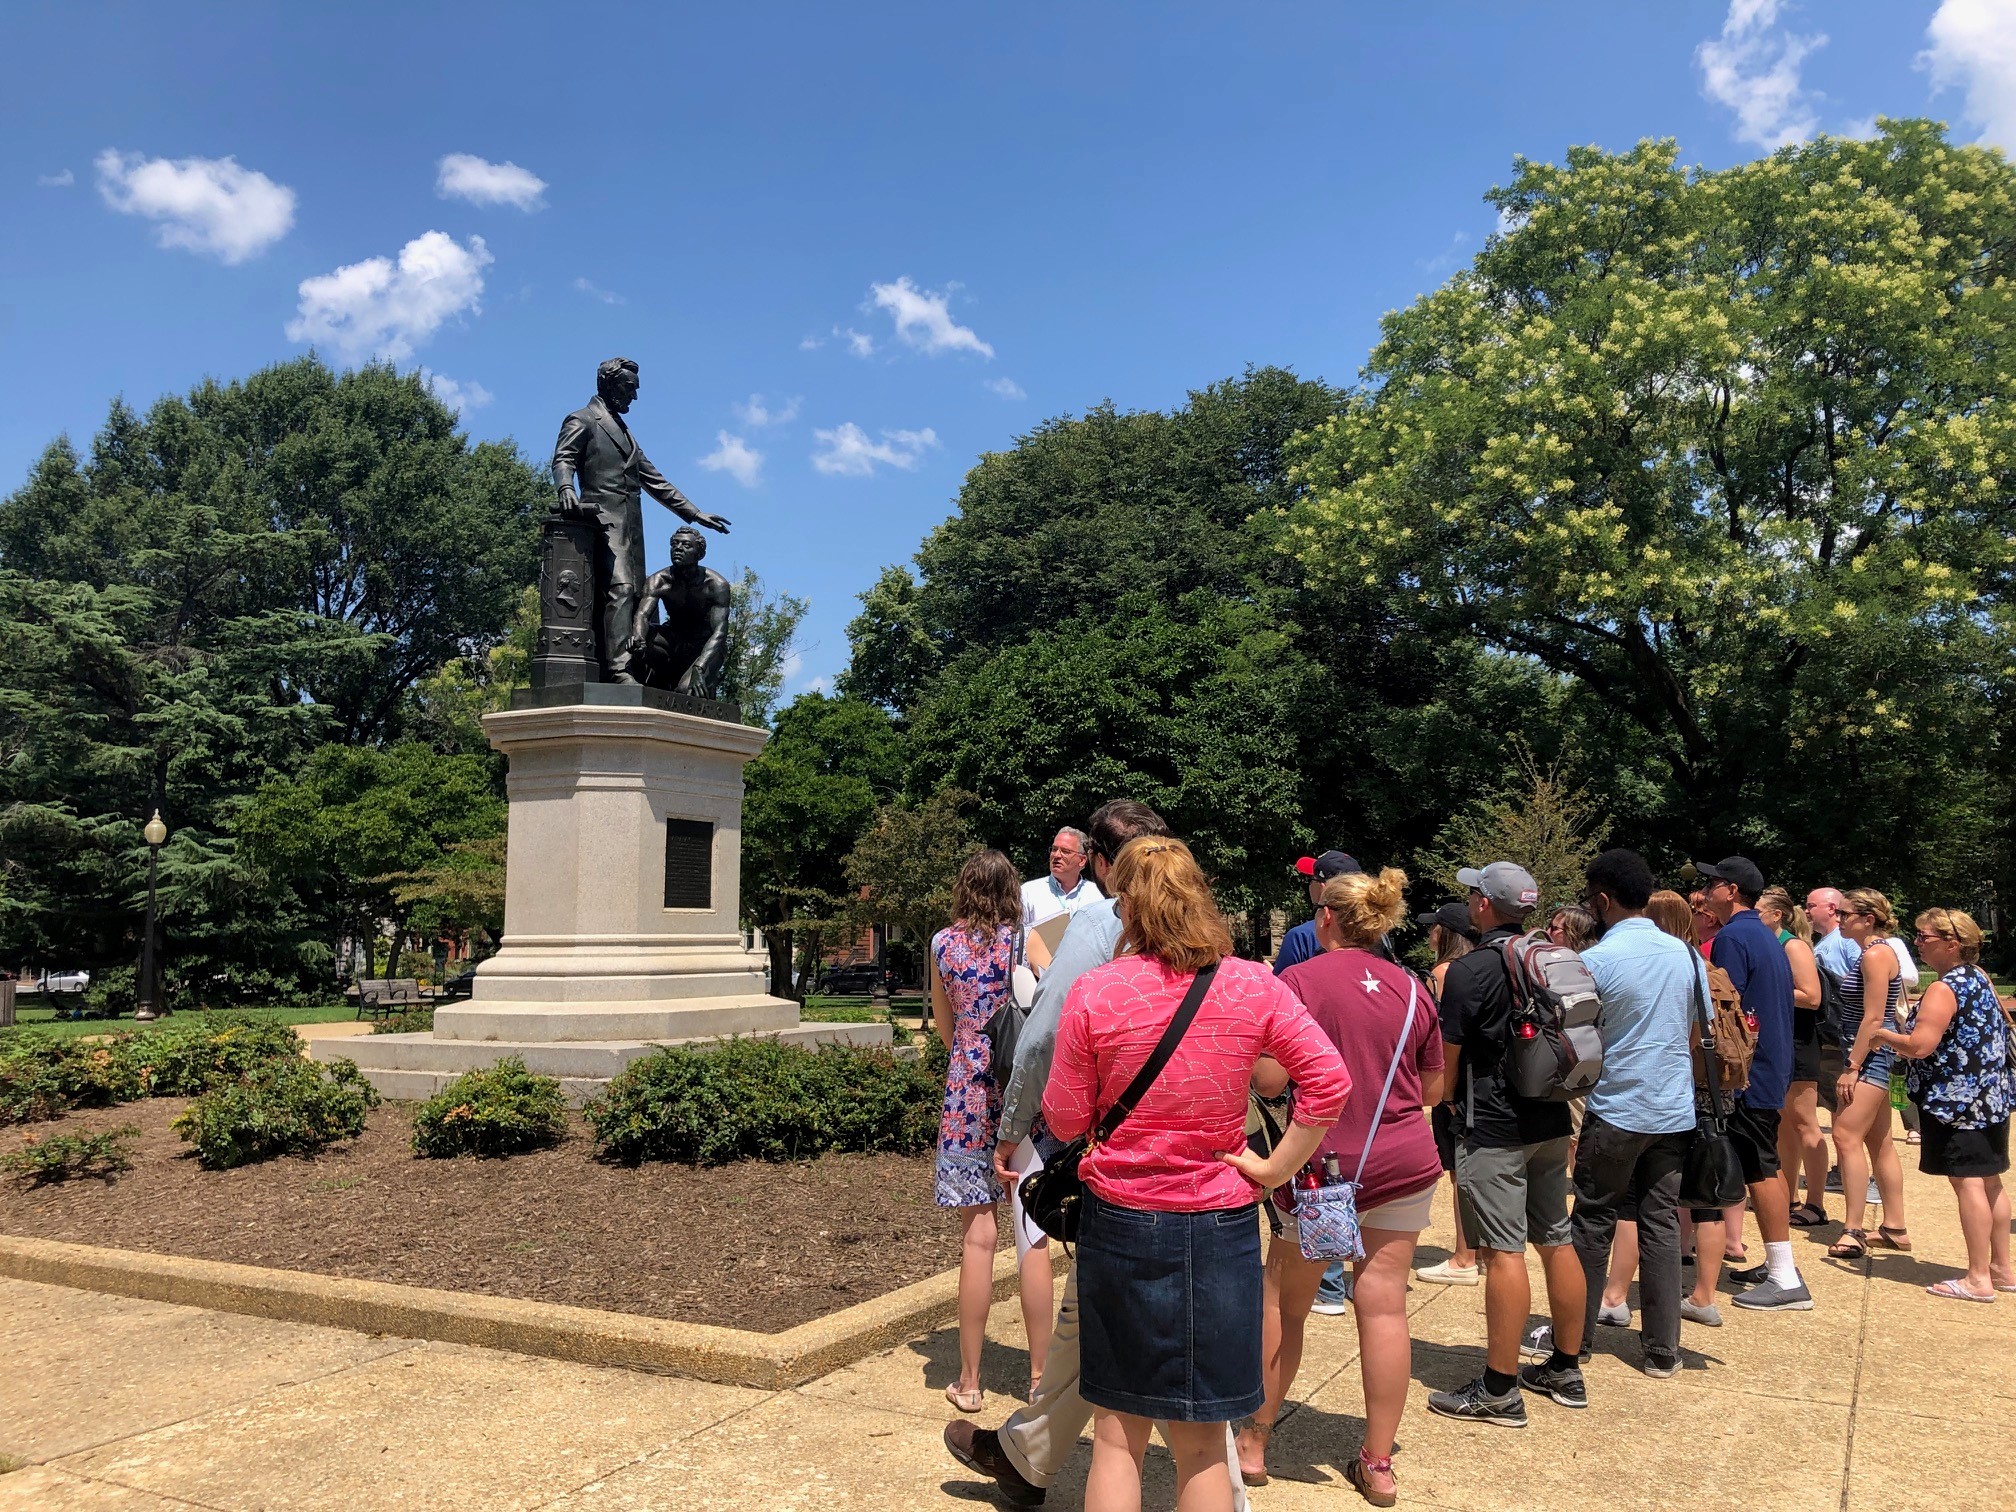 Teachers stand on DC's Lincoln's Park observing a statue of Abraham Lincoln and an emancipated slave. Lincoln stands and the emancipated man kneels beside him.